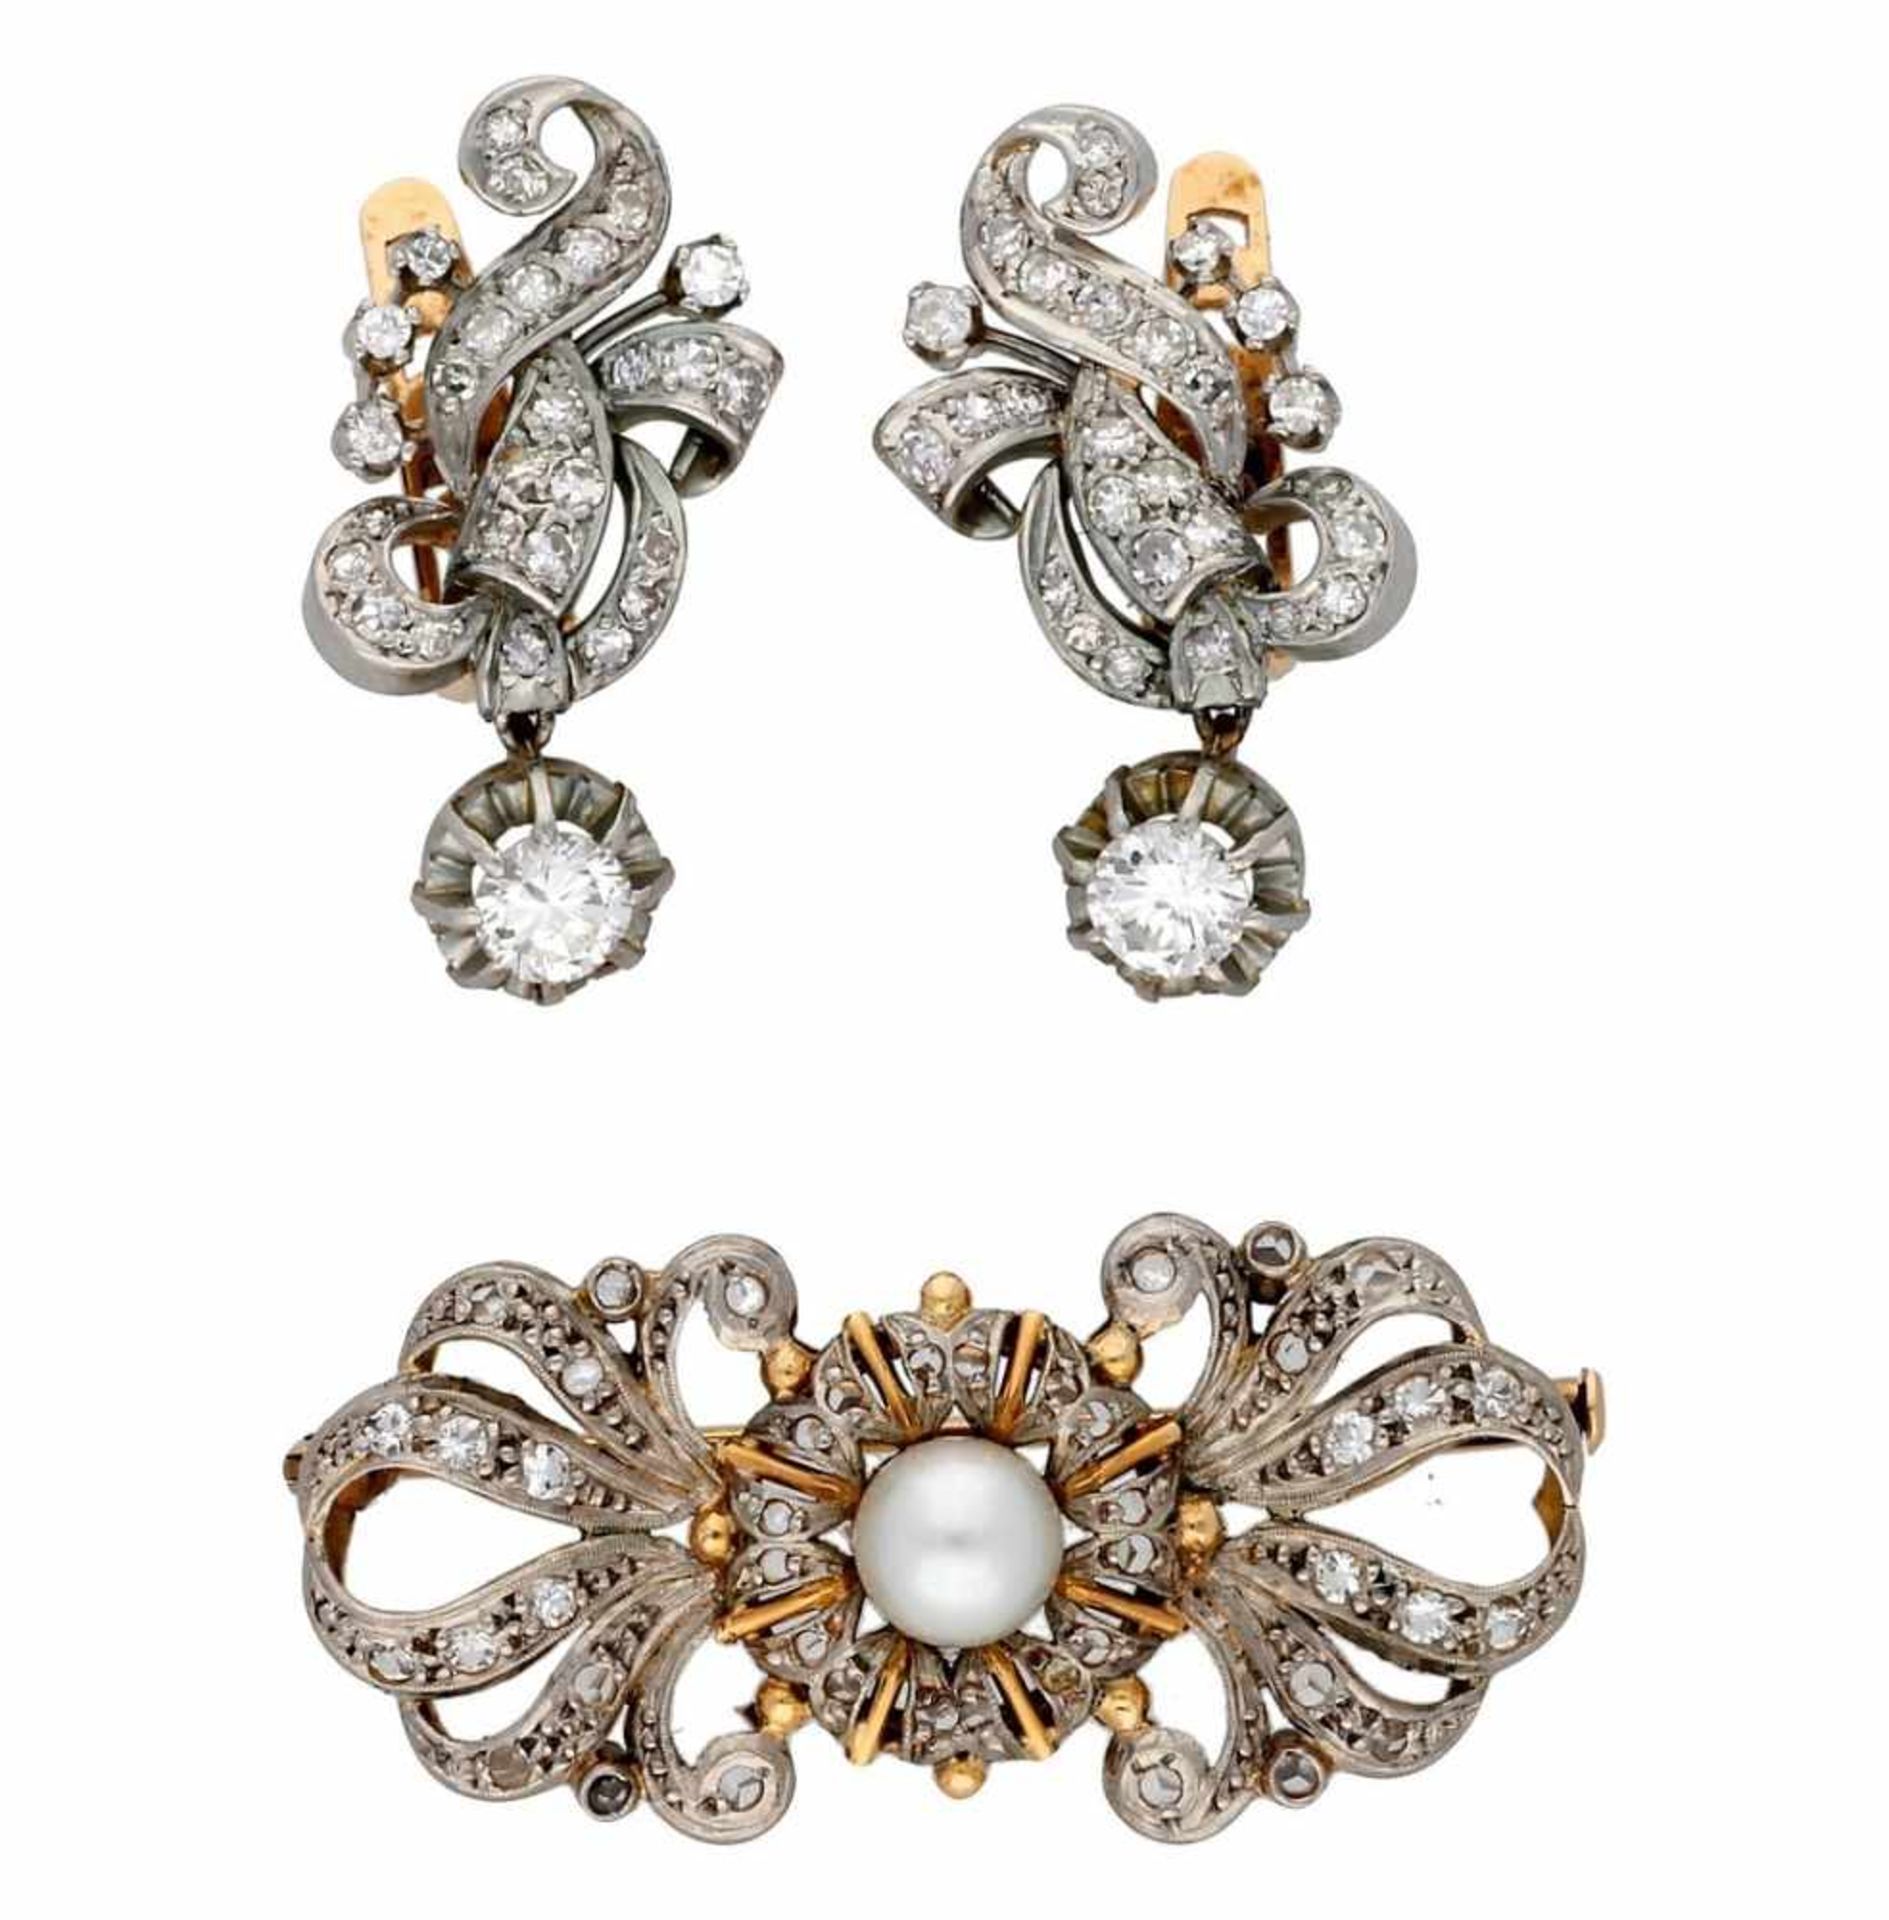 Brooch and earrings, circa 1940.Brooch in gold with white gold views, colourless topazes and